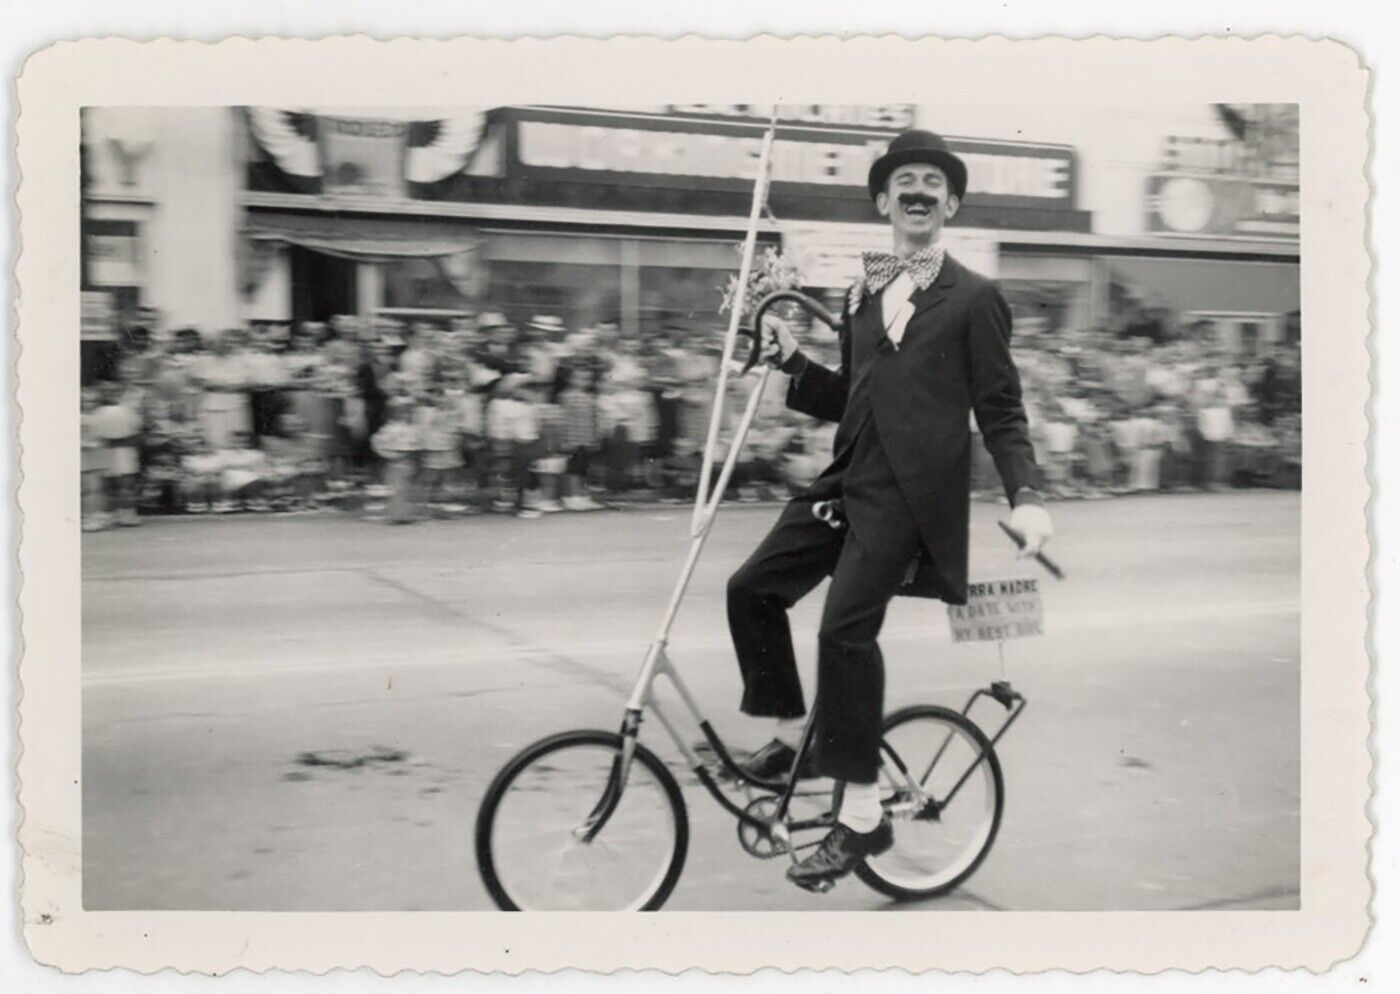 1950s deckle edged vintage photo GROUCHO MARX clown bicycle PARADE funny motion